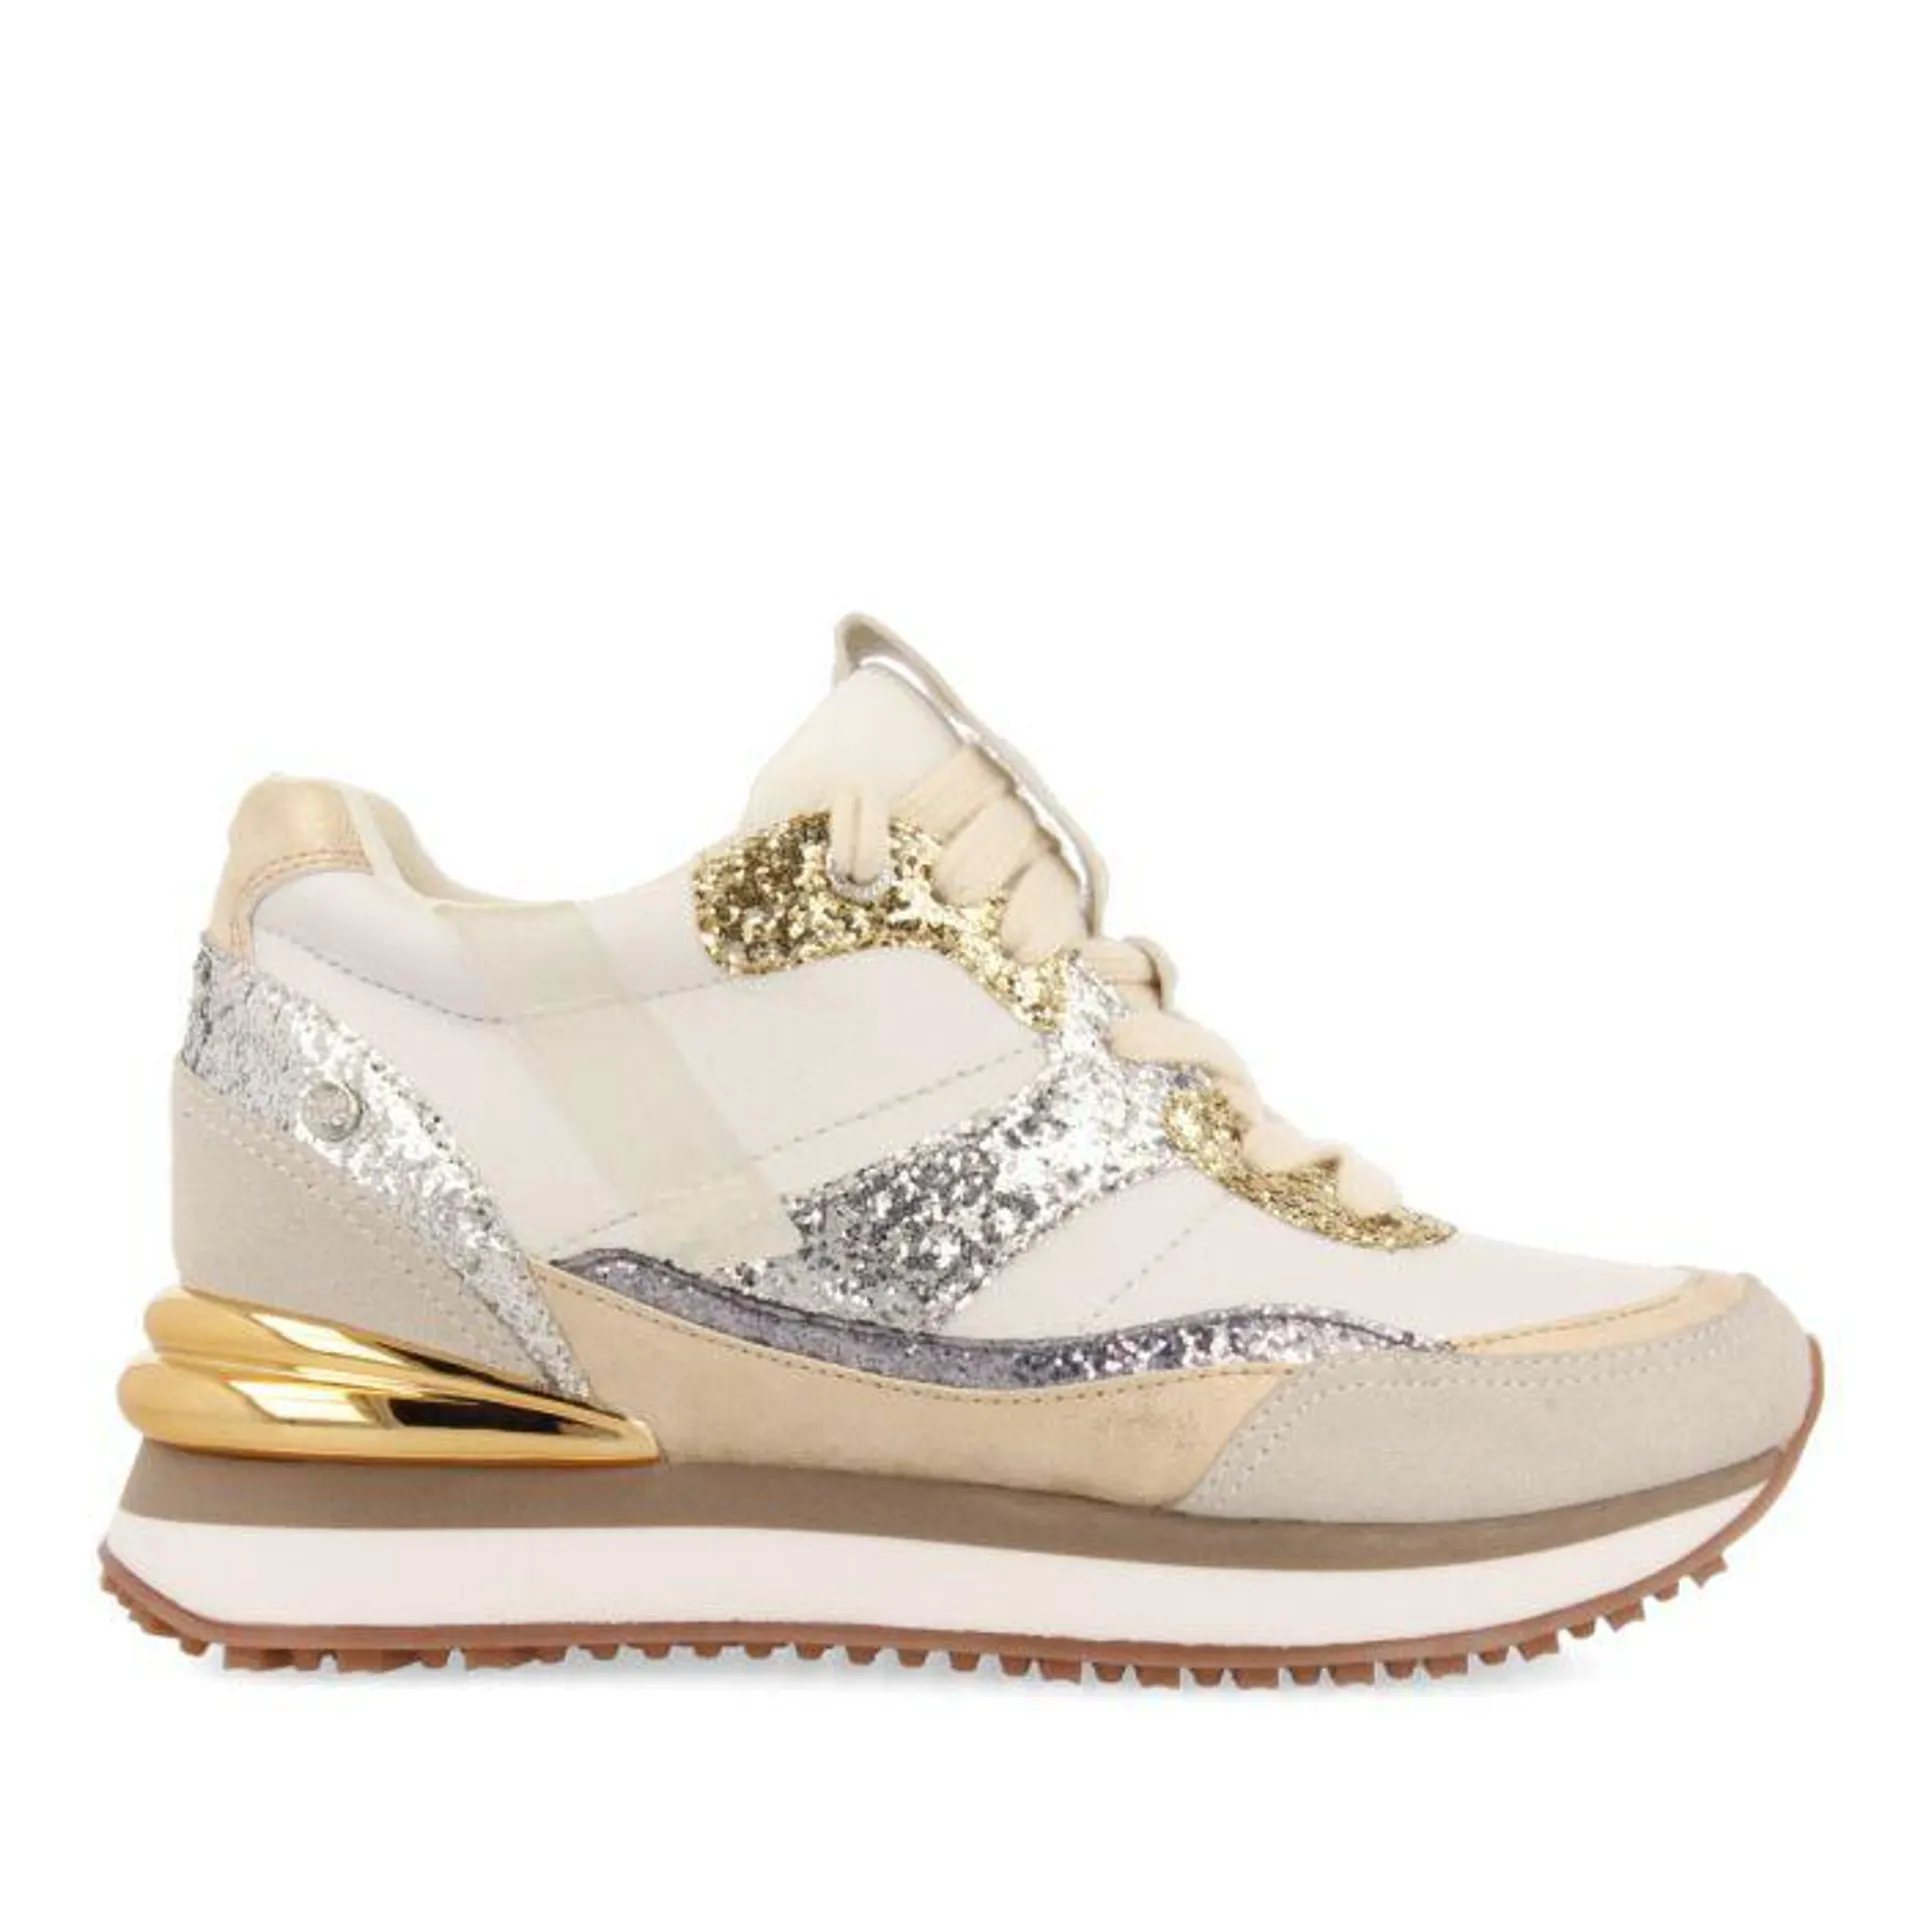 Archon women's white sneakers with inner wedges and glittery details